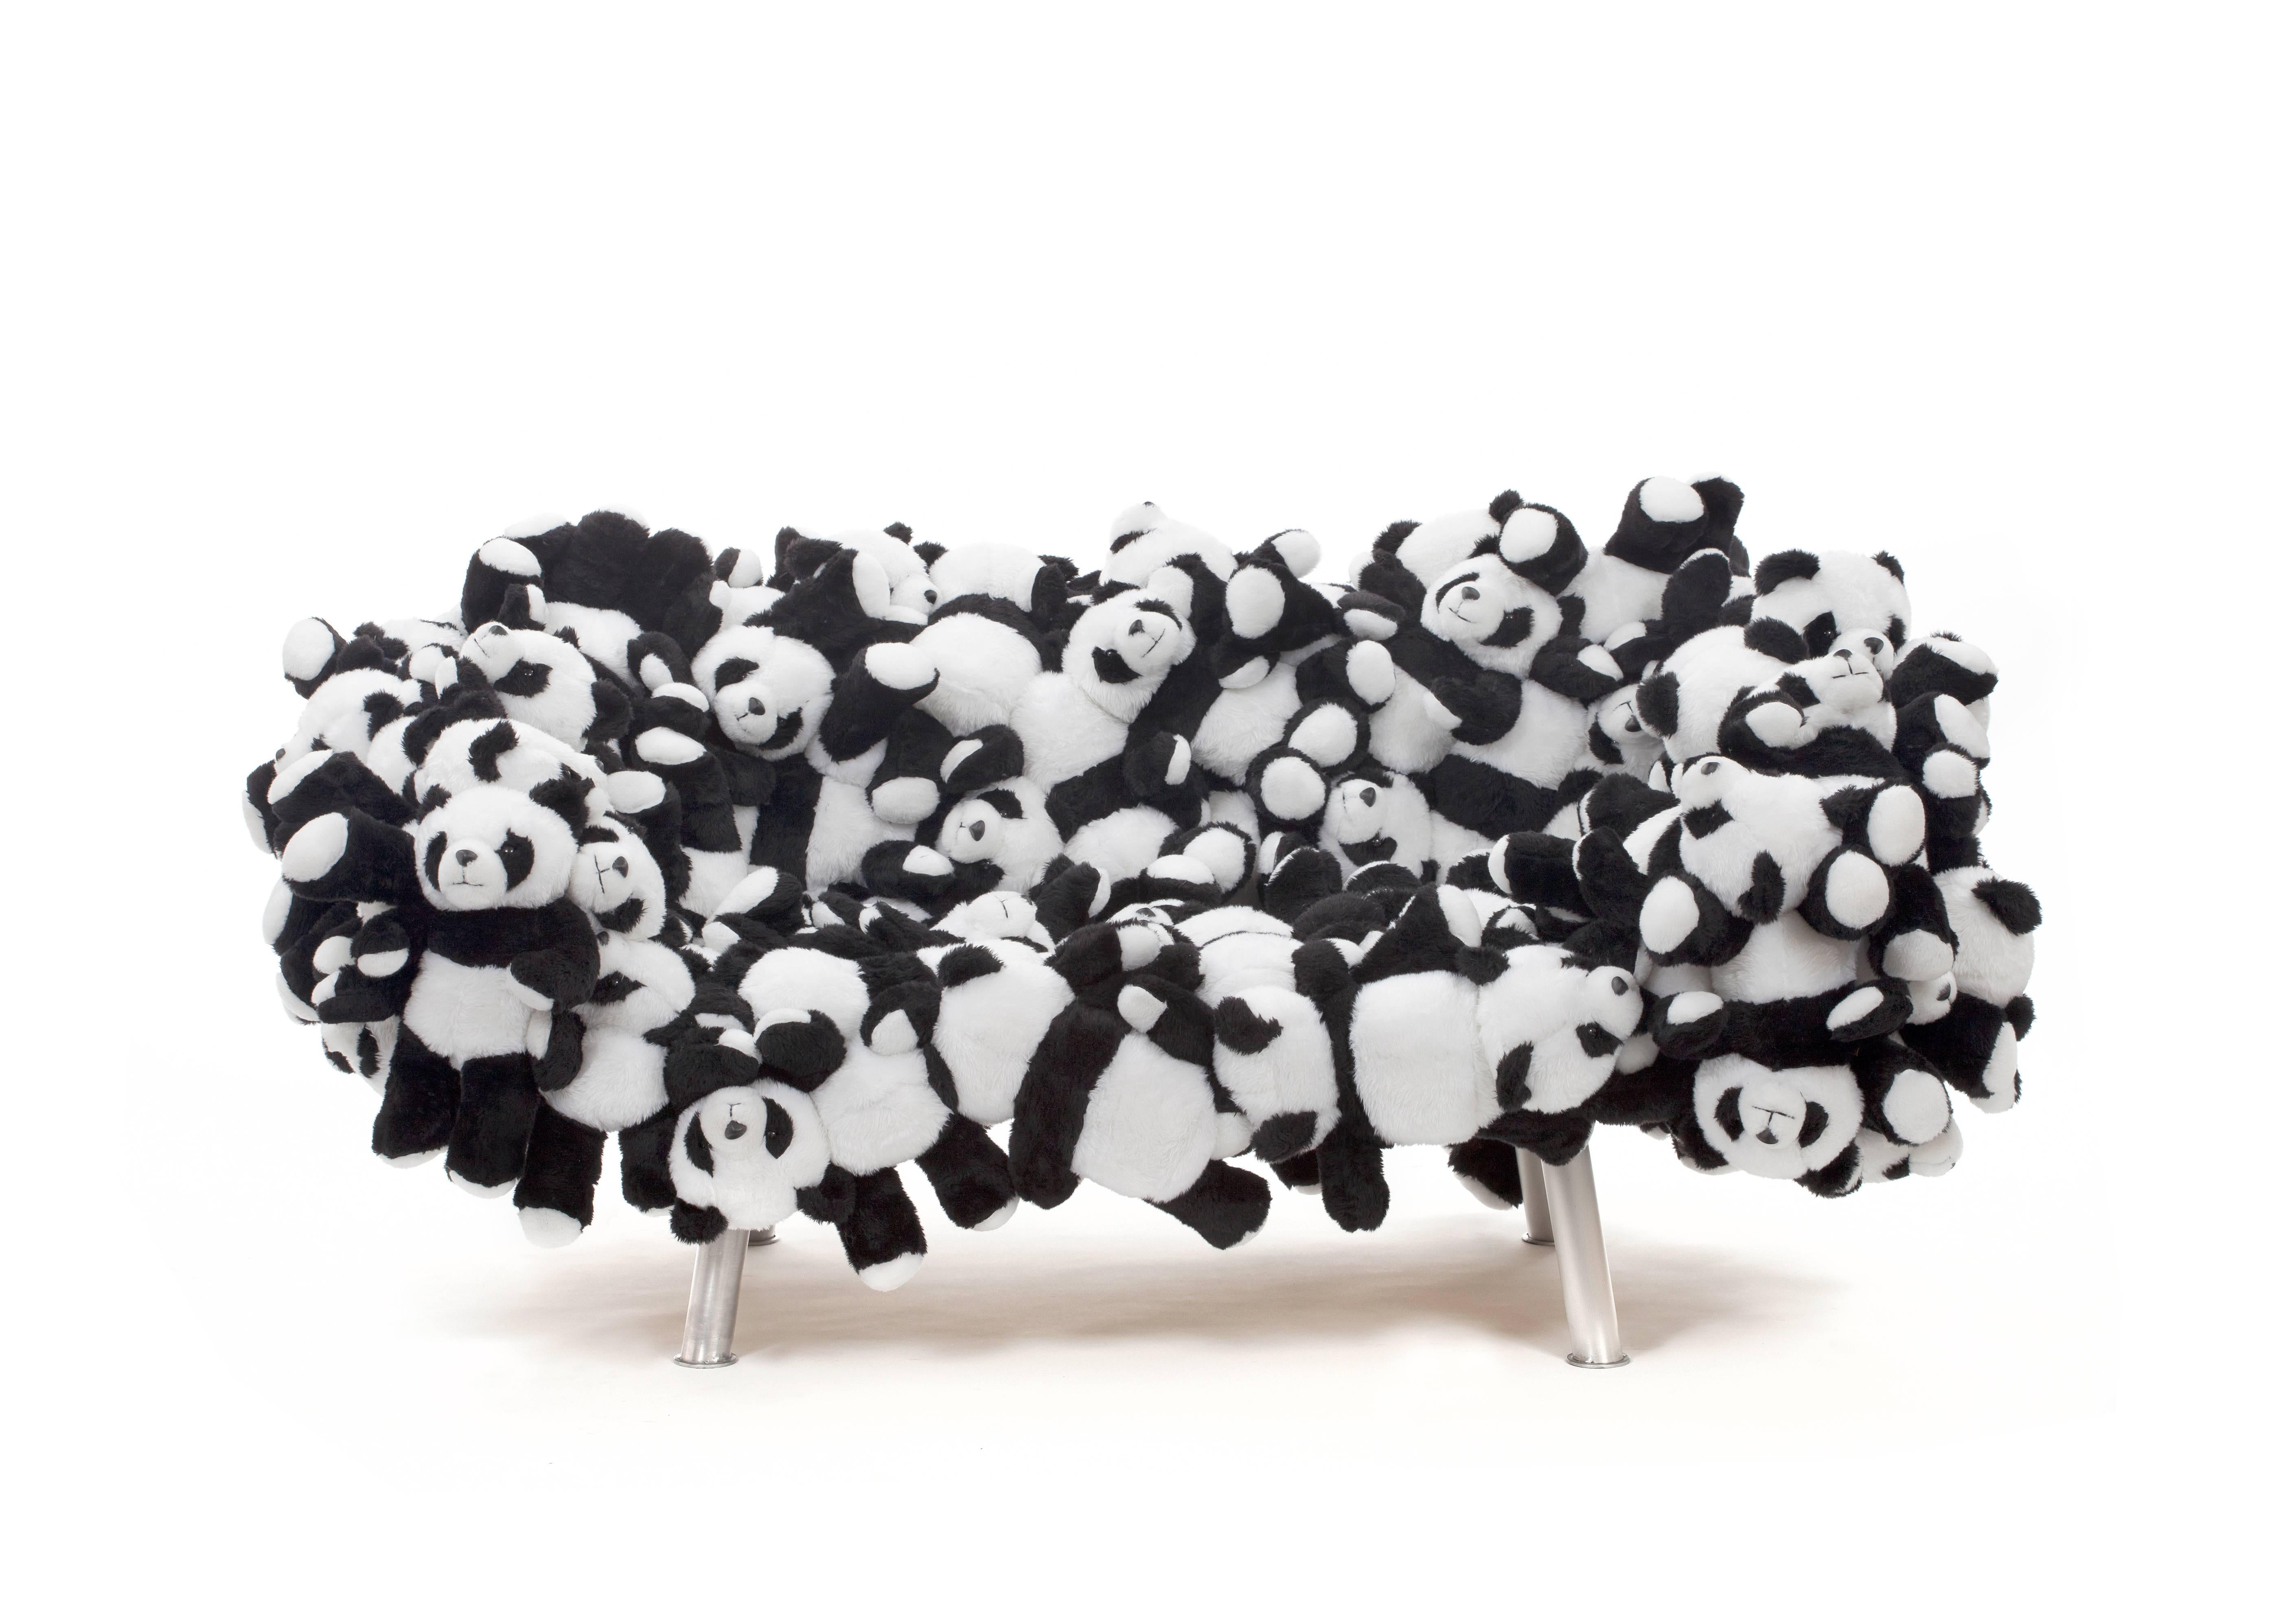 Plush sofa made from stuffed animals in a panda shape by Brazilian design duo and brothers Fernando and Humberto Campana.

The Campana Brothers, Fernando (b. 1961) and Humberto (b. 1953) were born in Brotas, a city outside of São Paulo. Together,